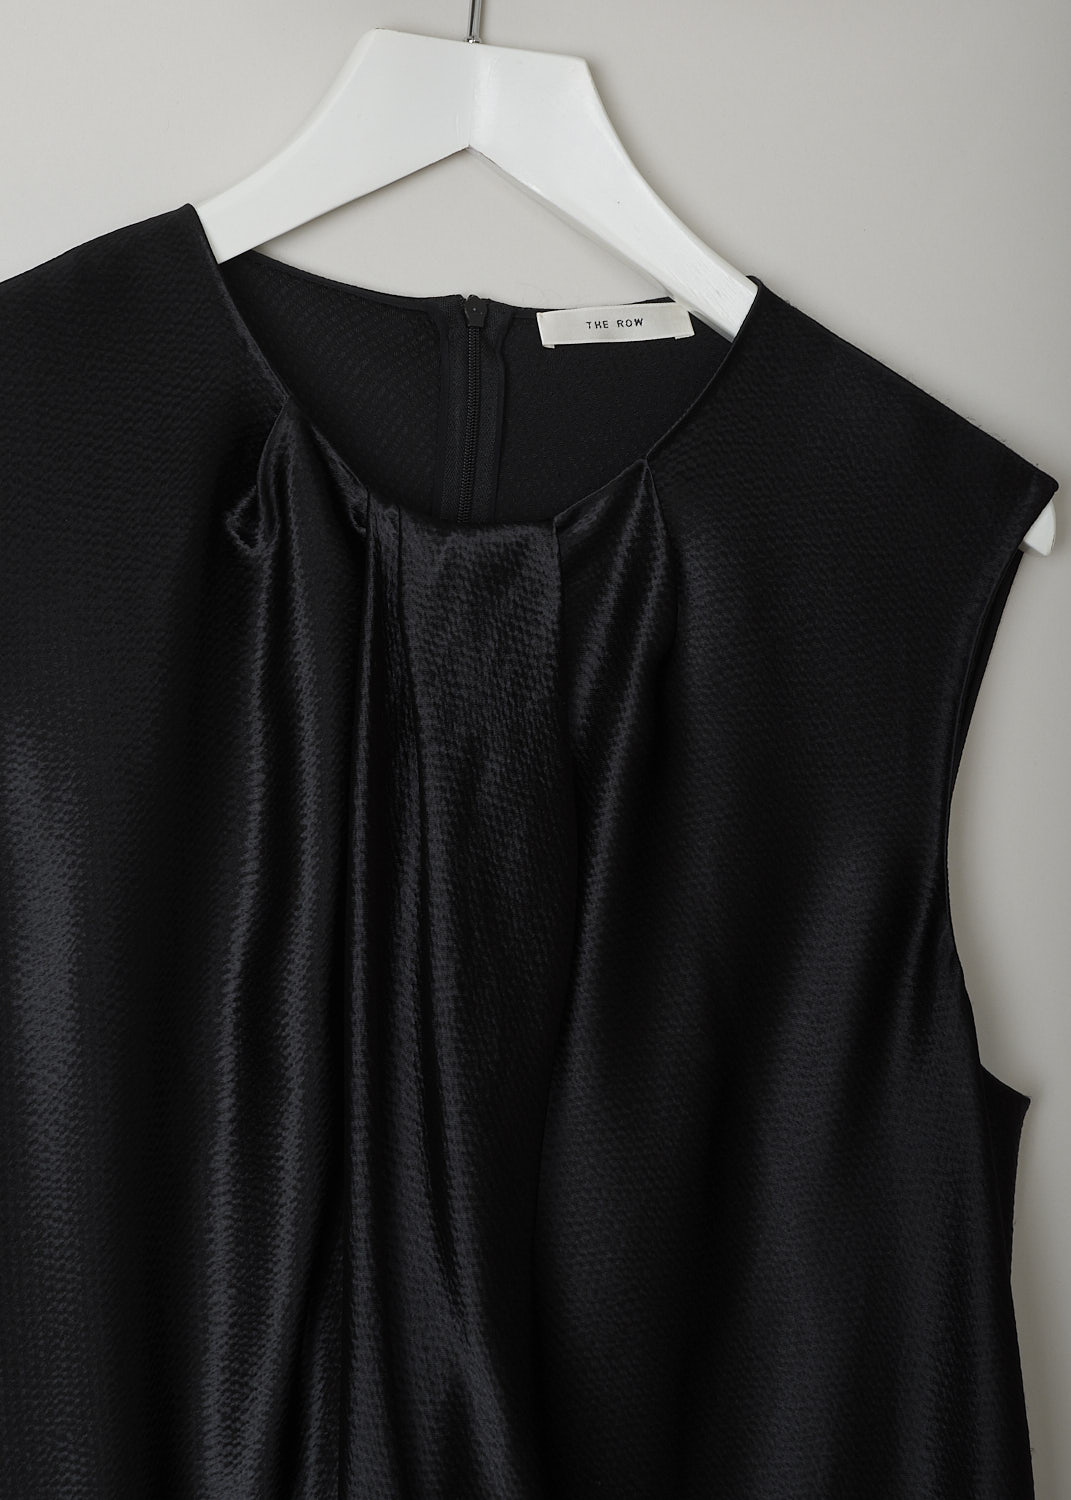 THE ROW, HAMMERED SATIN TOP IN BLACK, SHIRA_TOP_4923WI_616_BLACK,  Black, Detail, This hammered satin sleeveless top in black has a round neckline with a pleated front detailing. In the back, a concealed centre zip can be found. The top has a wider silhouette.
